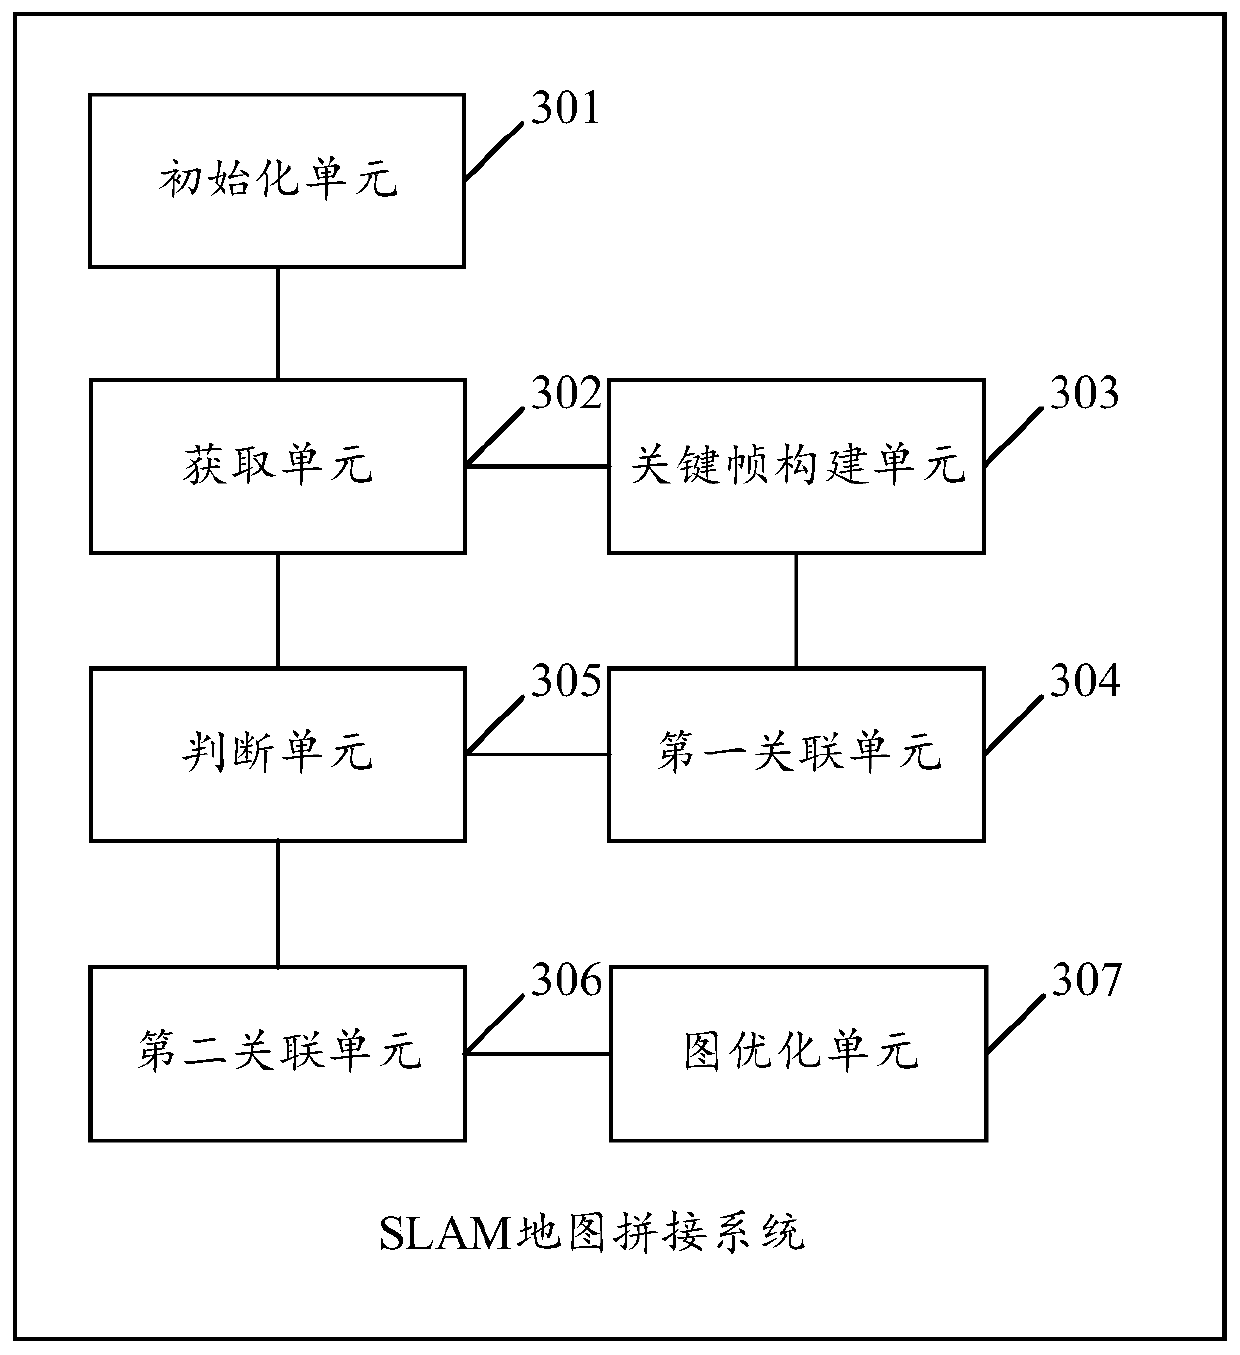 An SLAM map splicing method and system